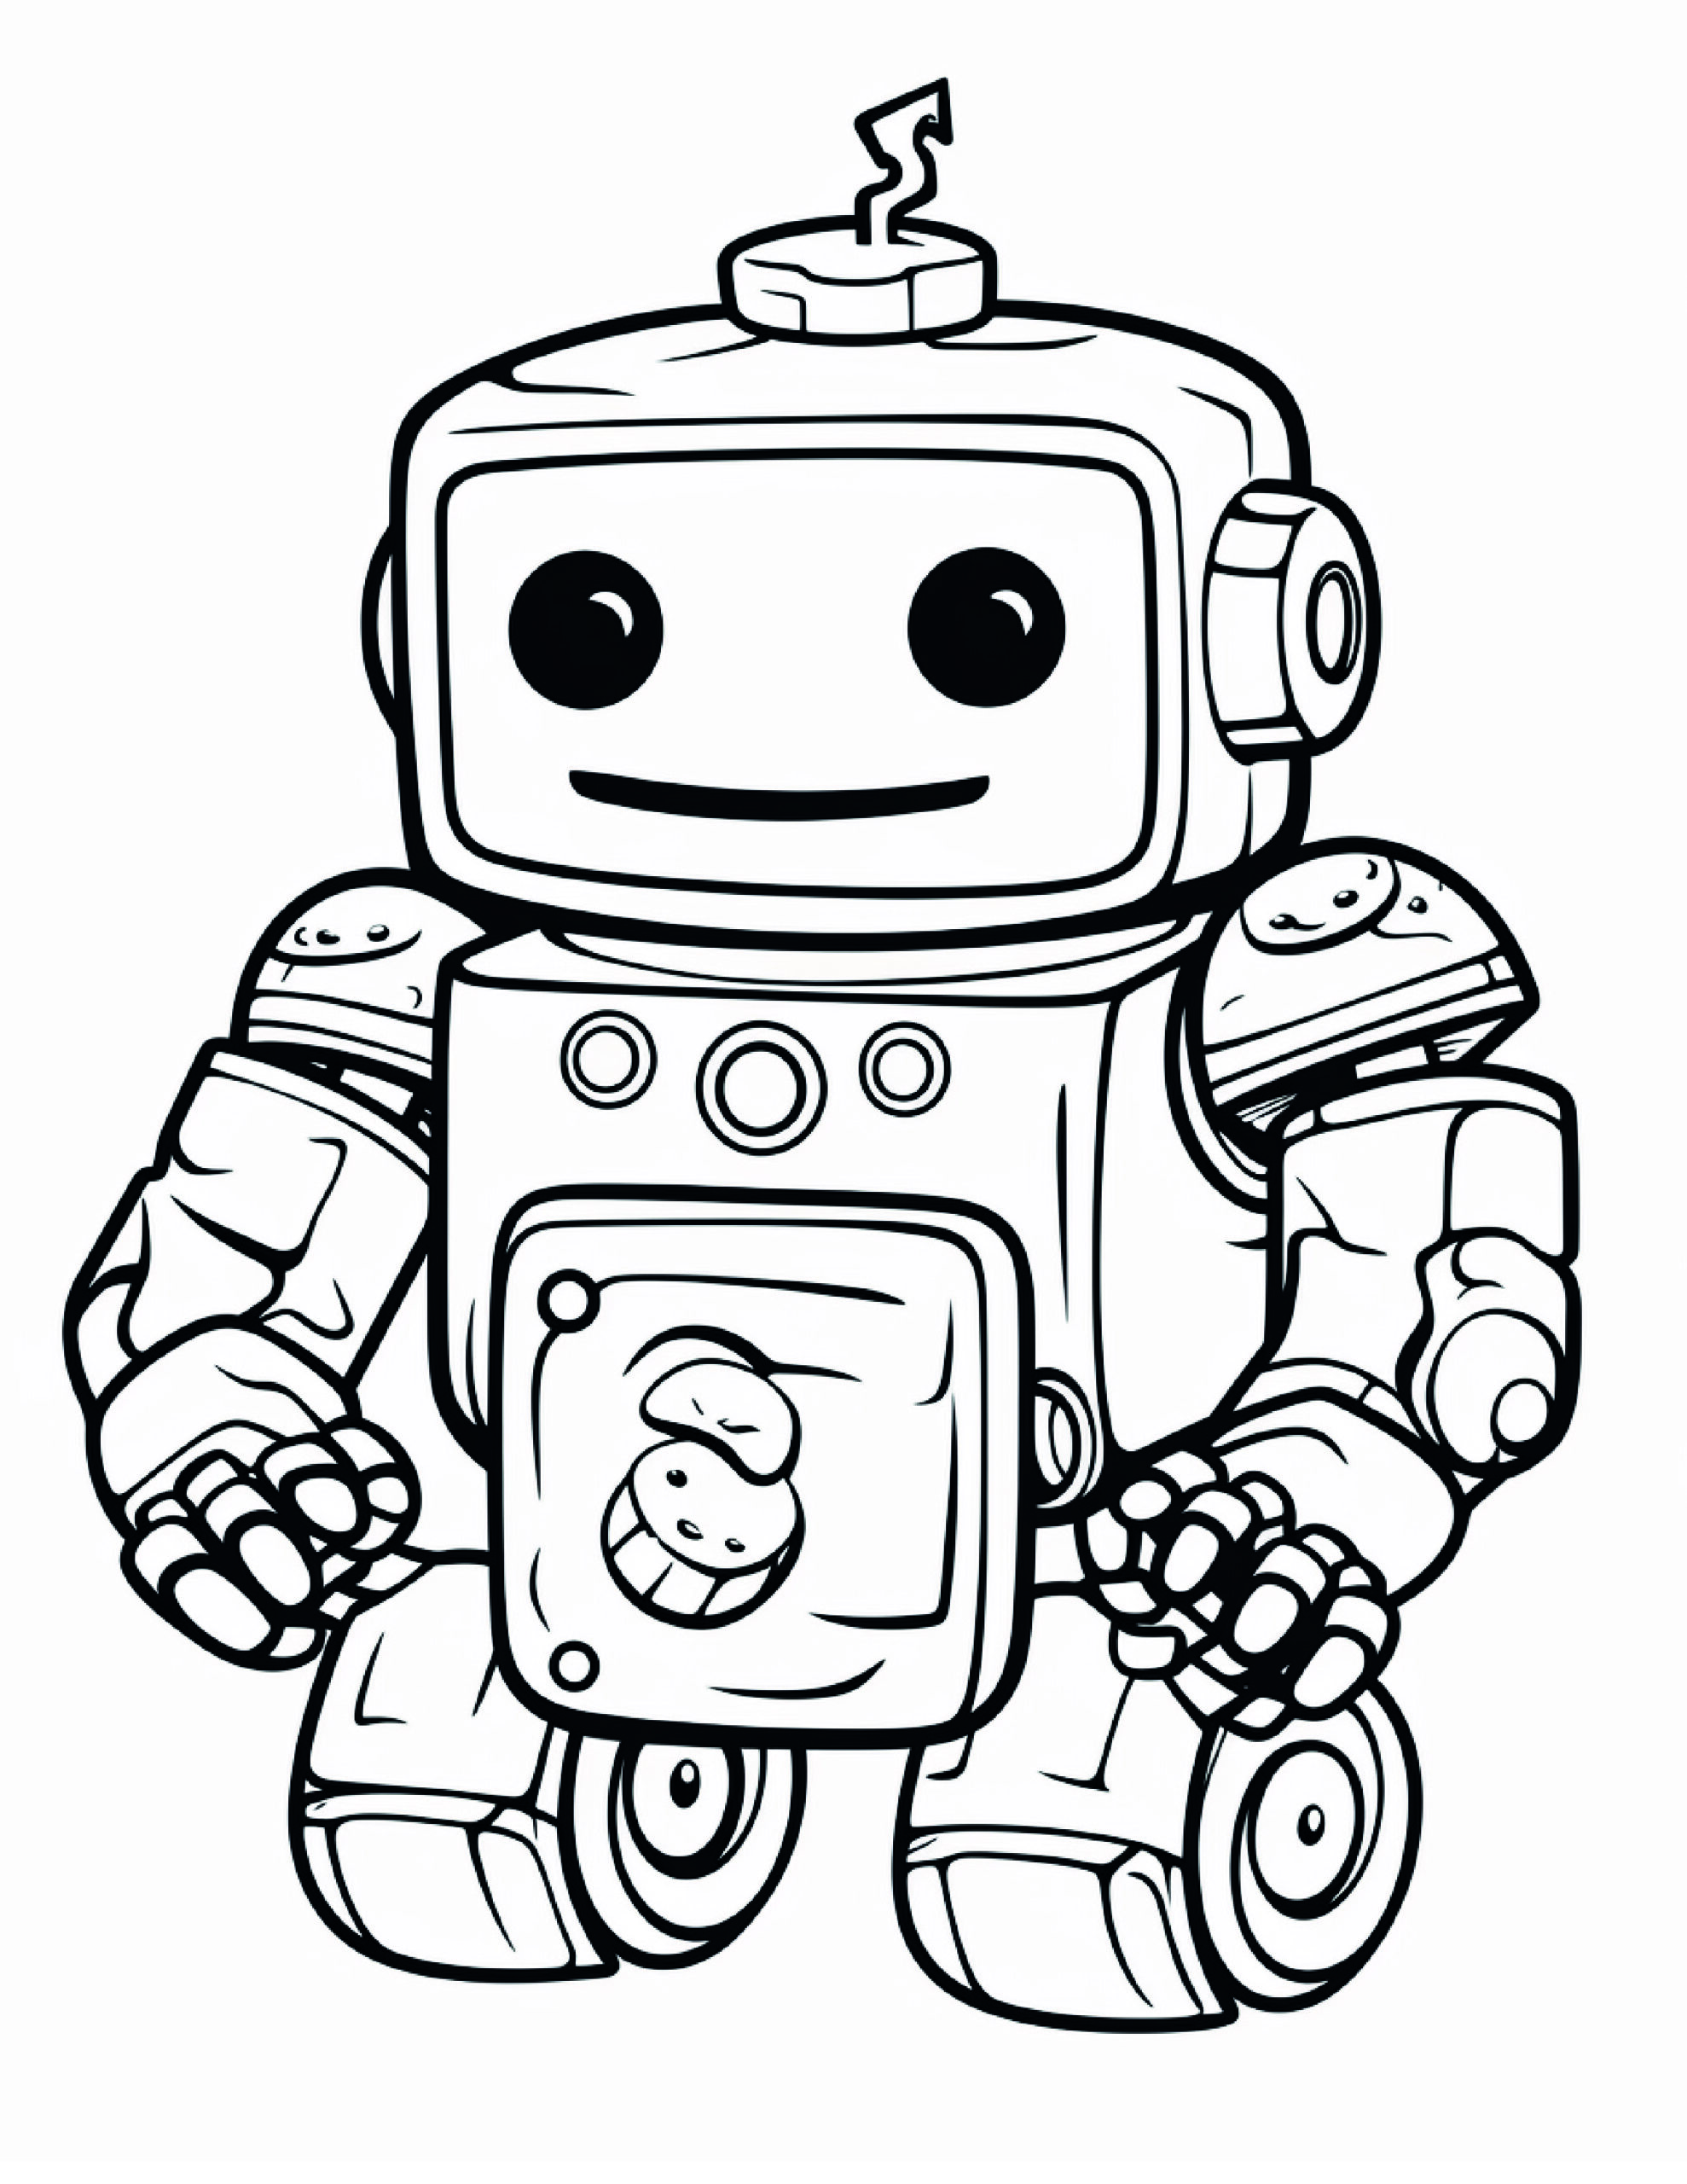 Robot Coloring Page 14 - A line drawing of a helpful robot. 